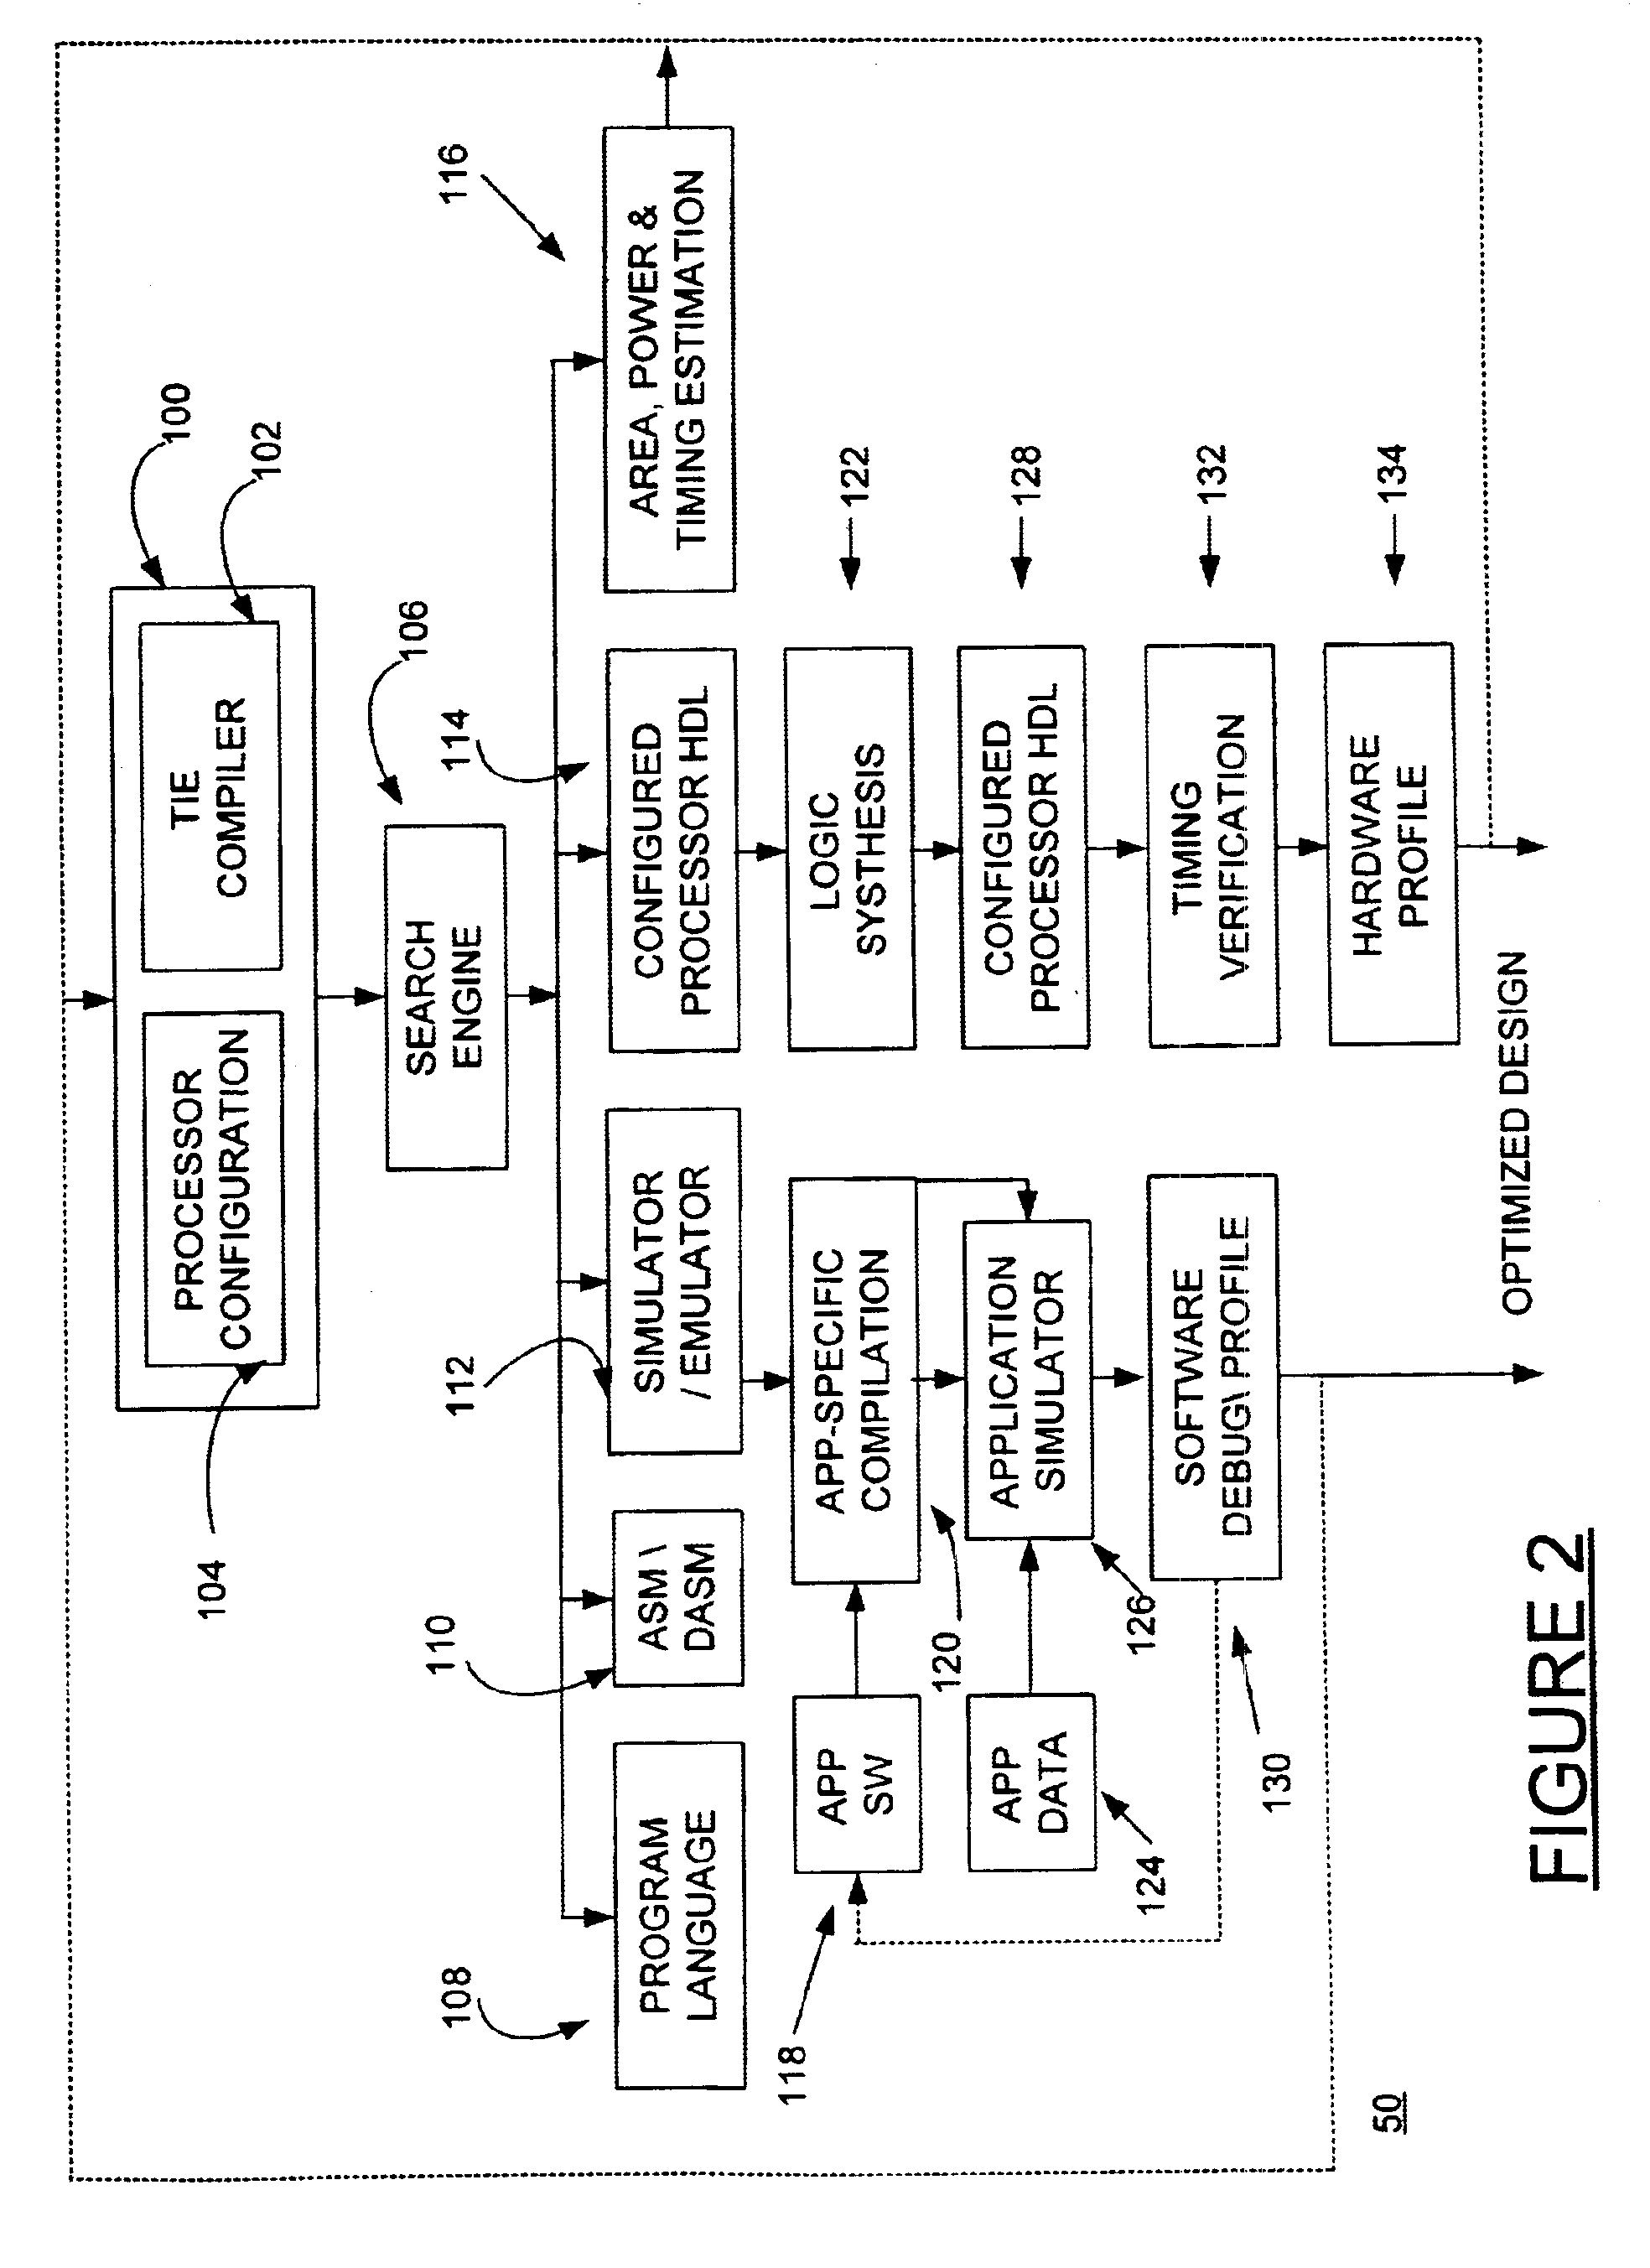 System and method for dynamically designing and evaluating configurable processor instructions